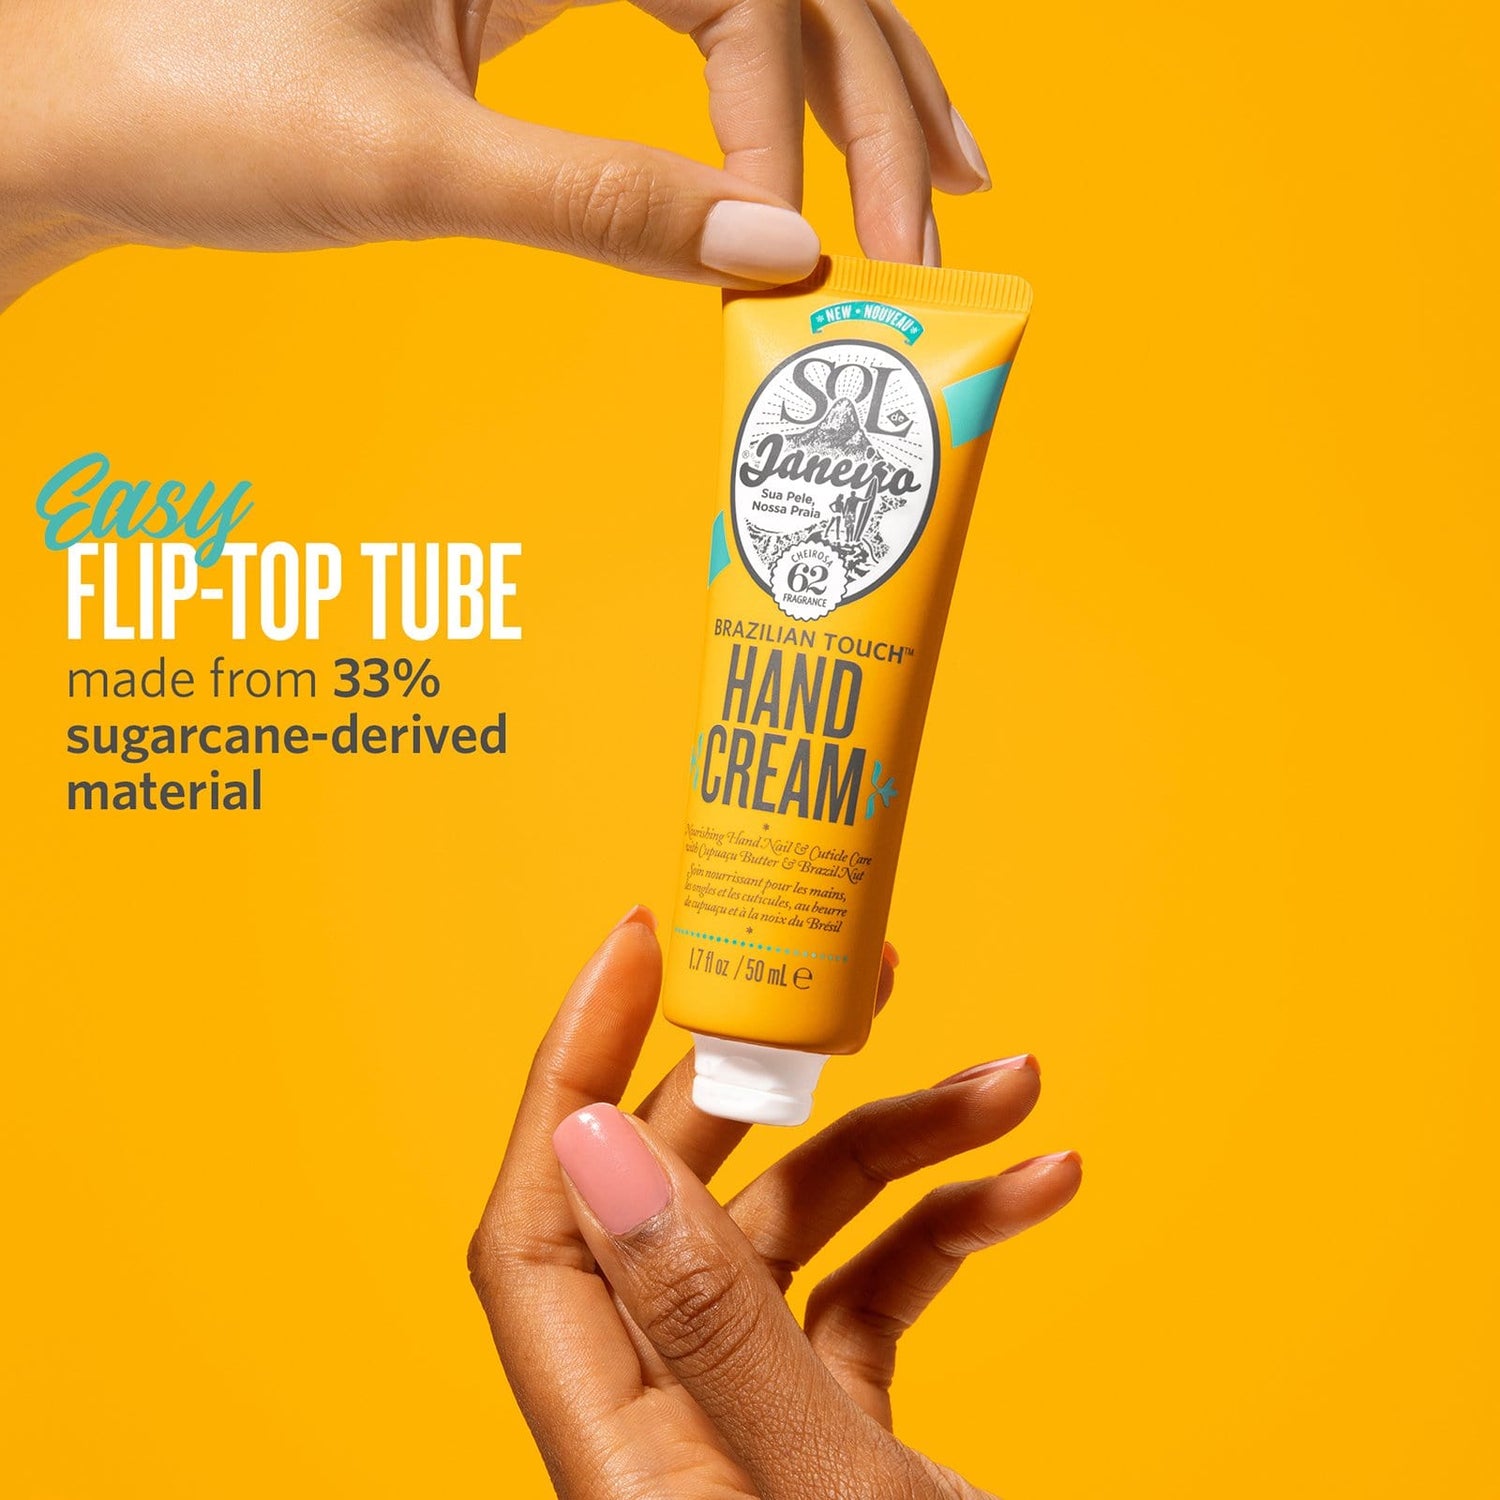 Brazilian Touch Hand Cream, Sol de Janeiro. Easy Flip-top tube, made from 33% sugarcane-derived material.